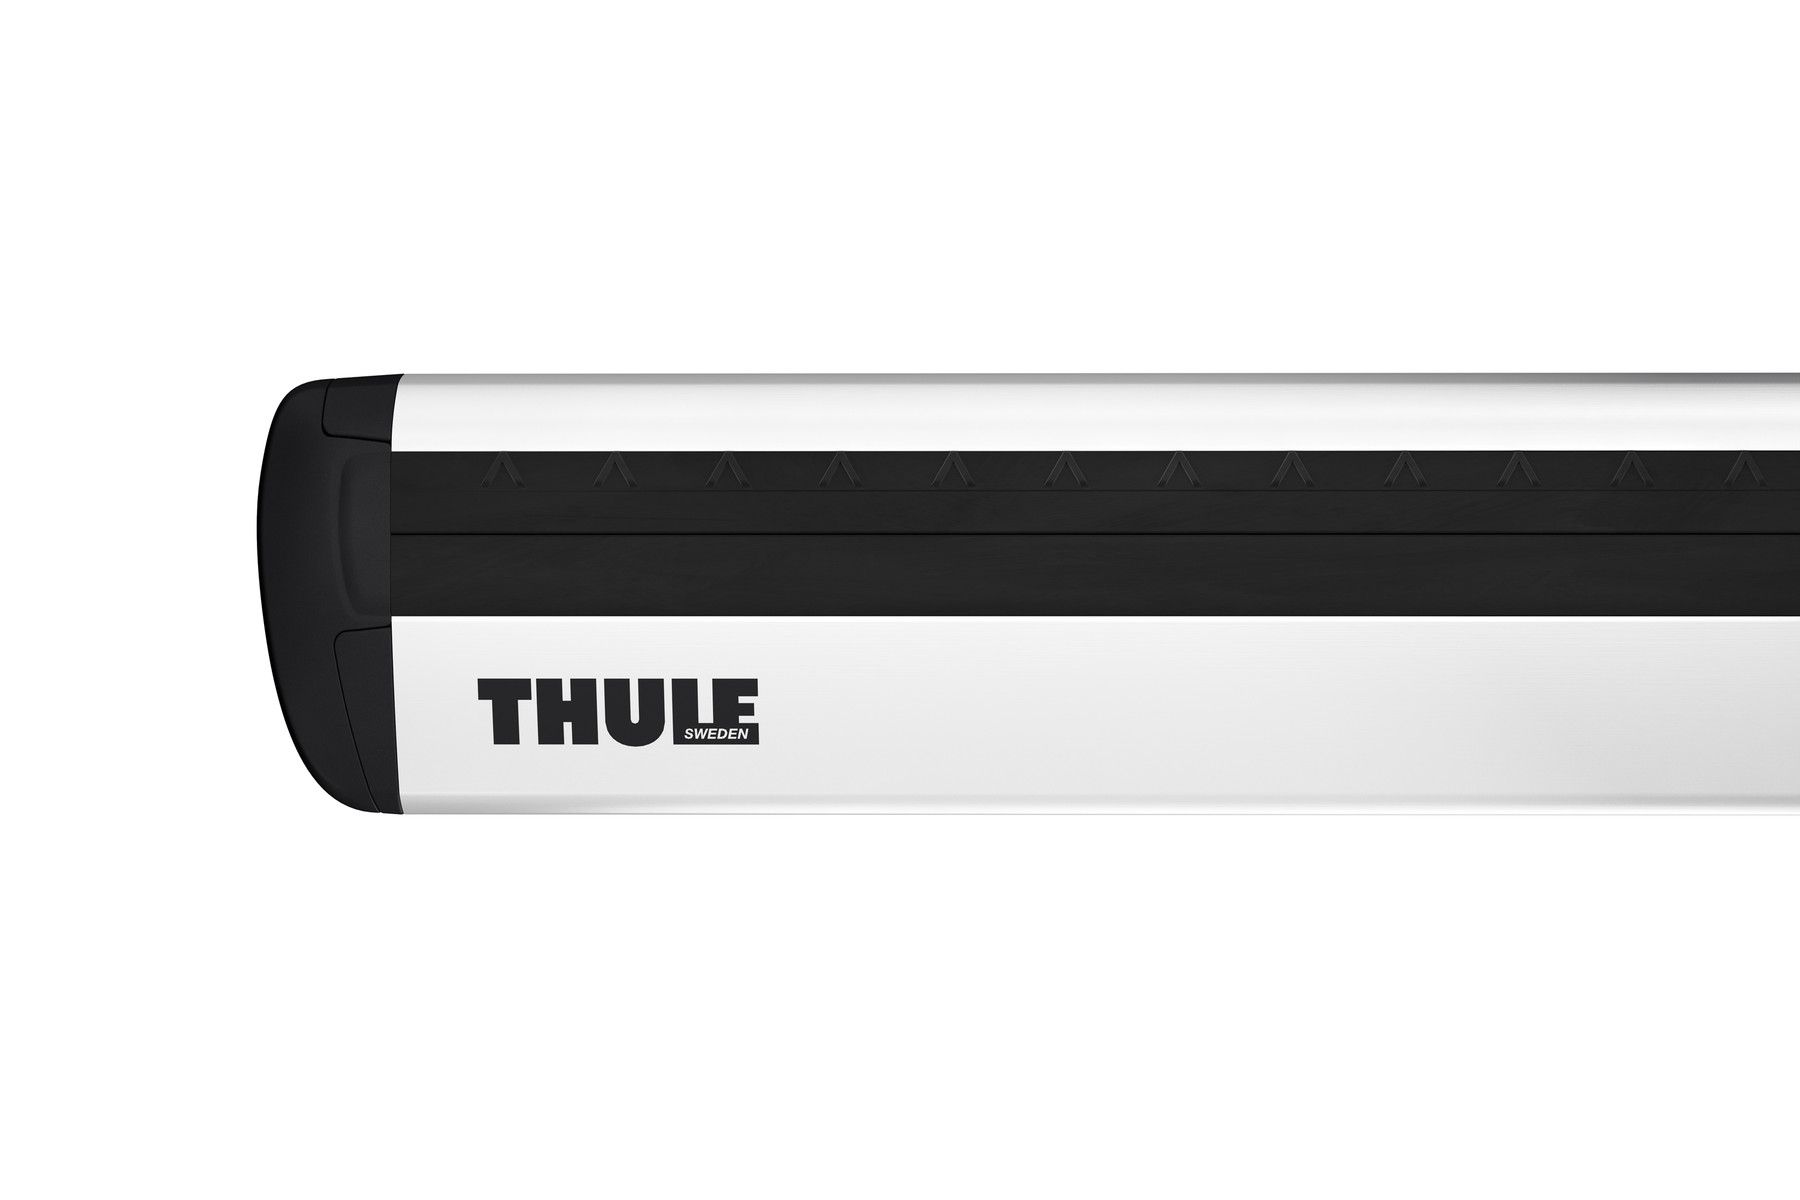 Thule WingBar Evo Silver 2 Bar Roof Rack for BMW X5 F15 5dr SUV with Flush Roof Rail (2013 to 2018) - Flush Rail Mount